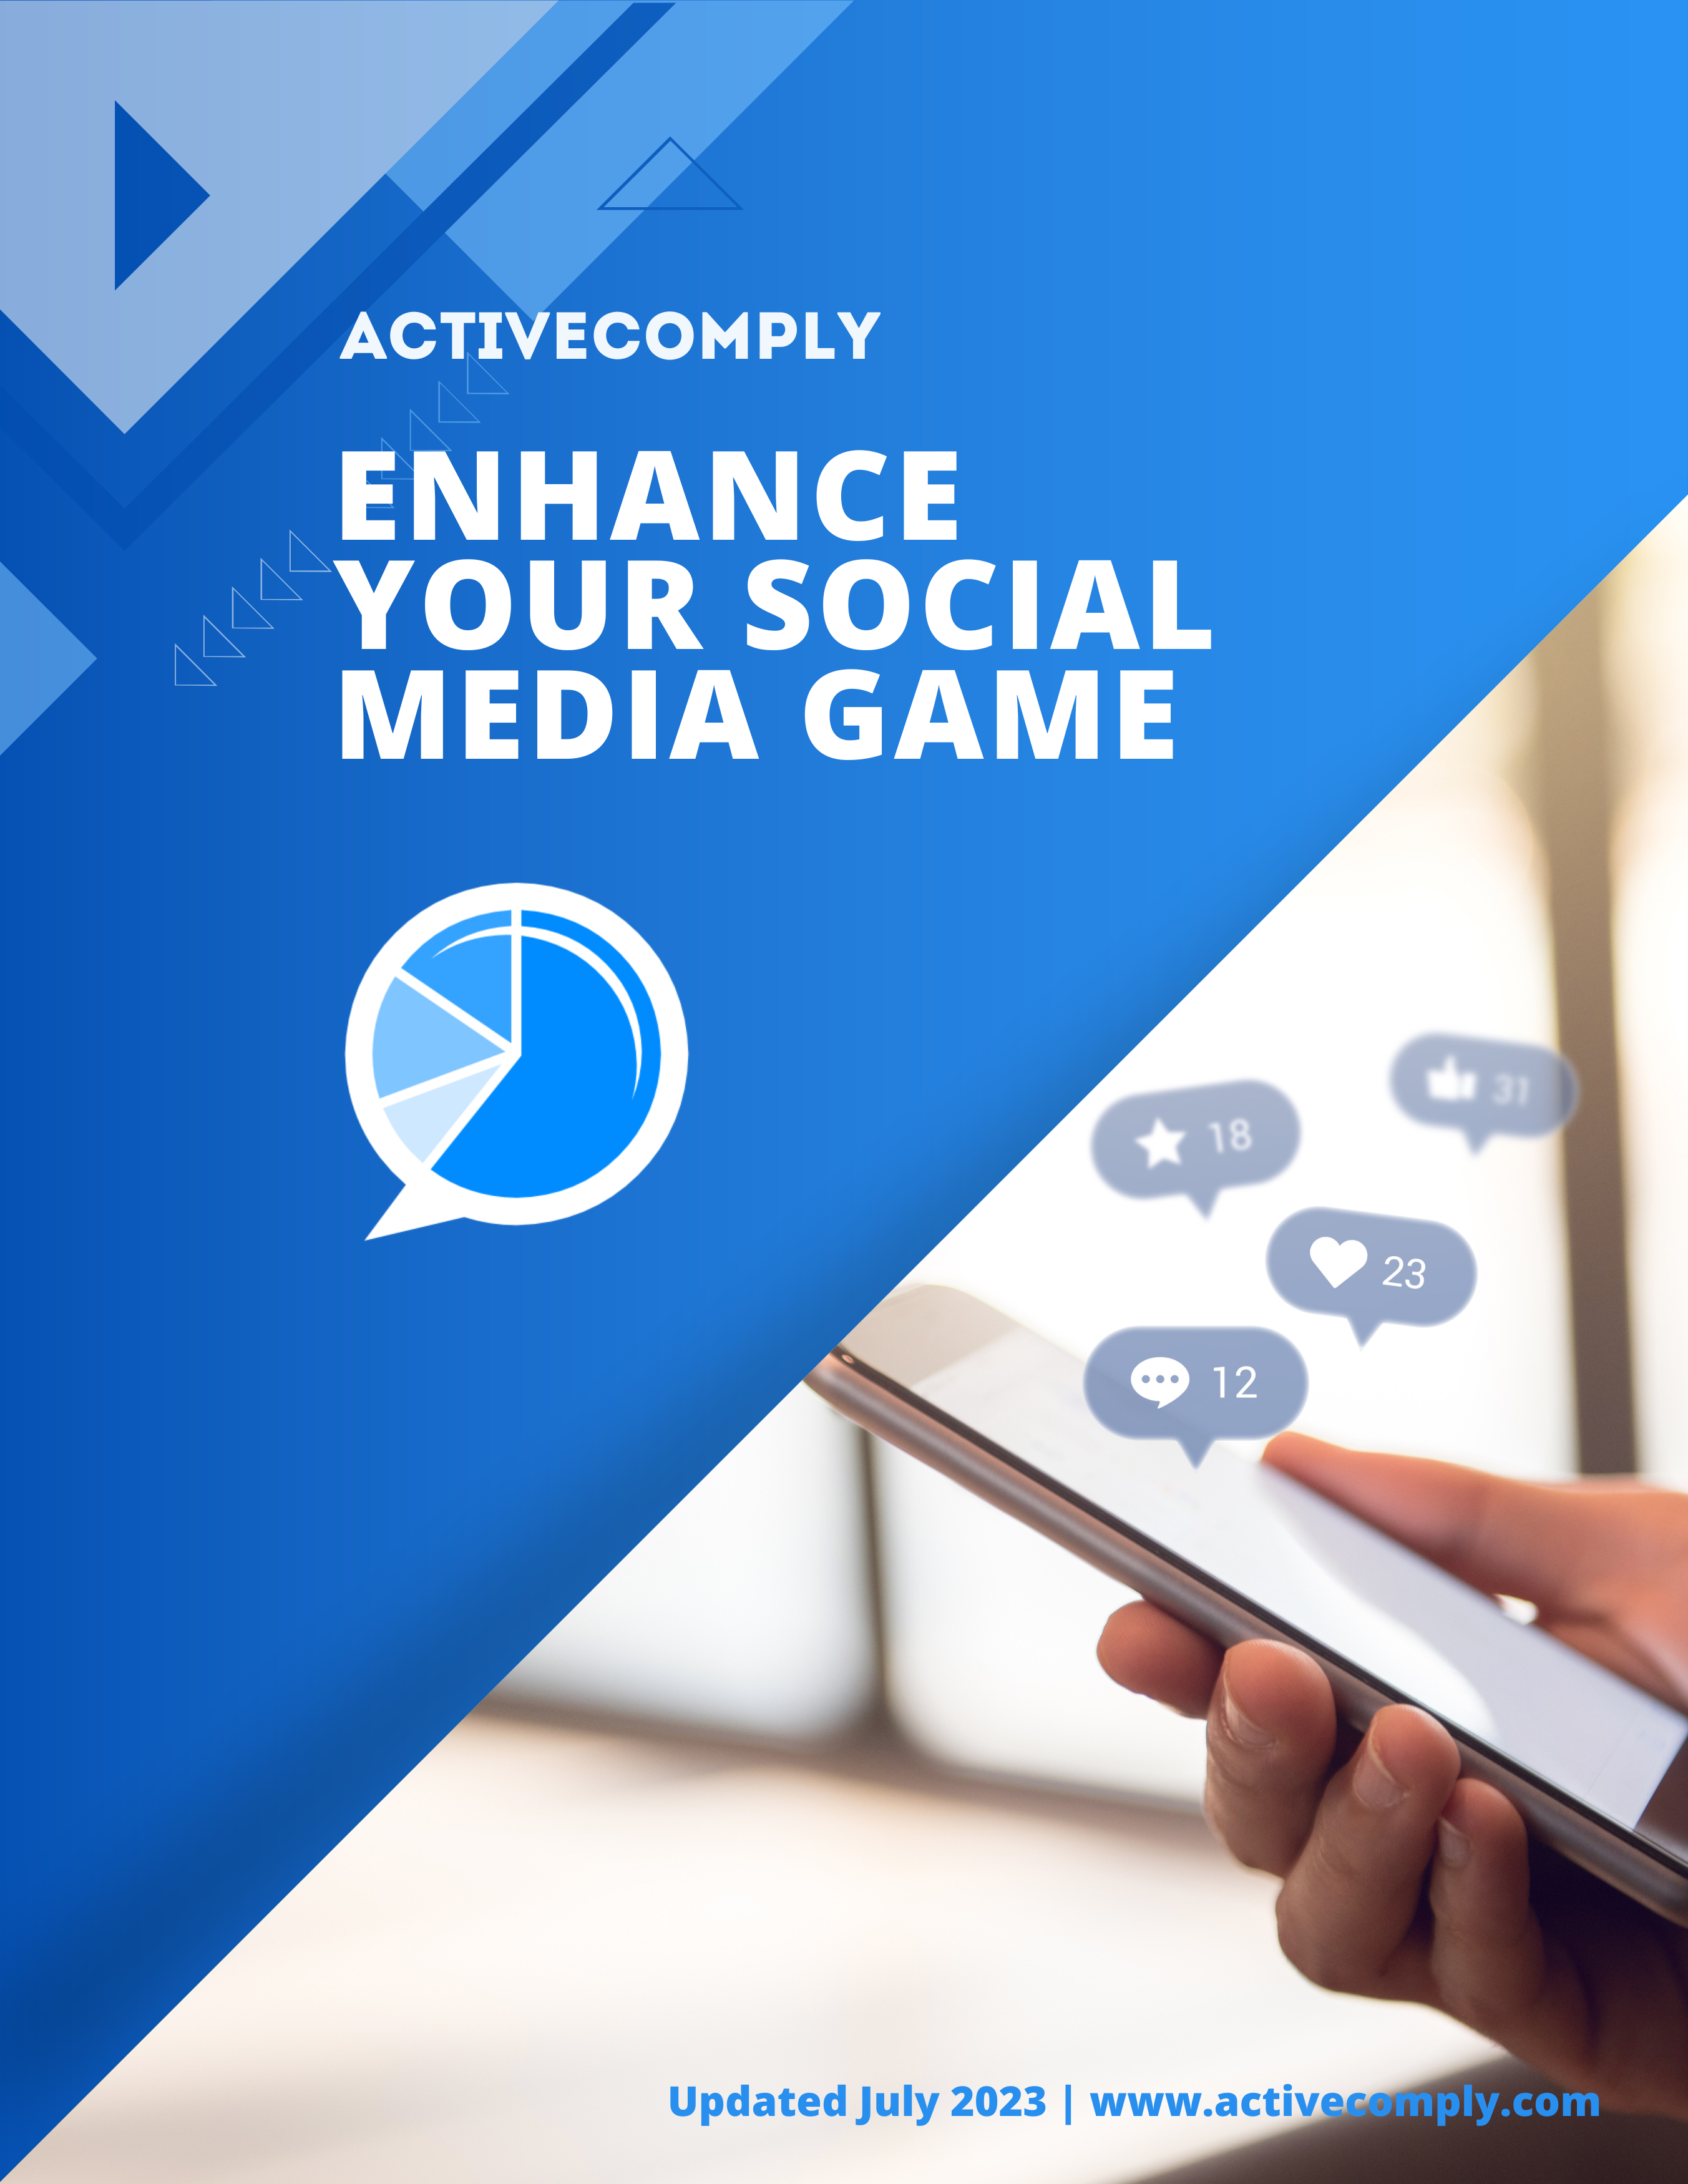 ActiveComply Enhance Your Social Media Game Tips Guide